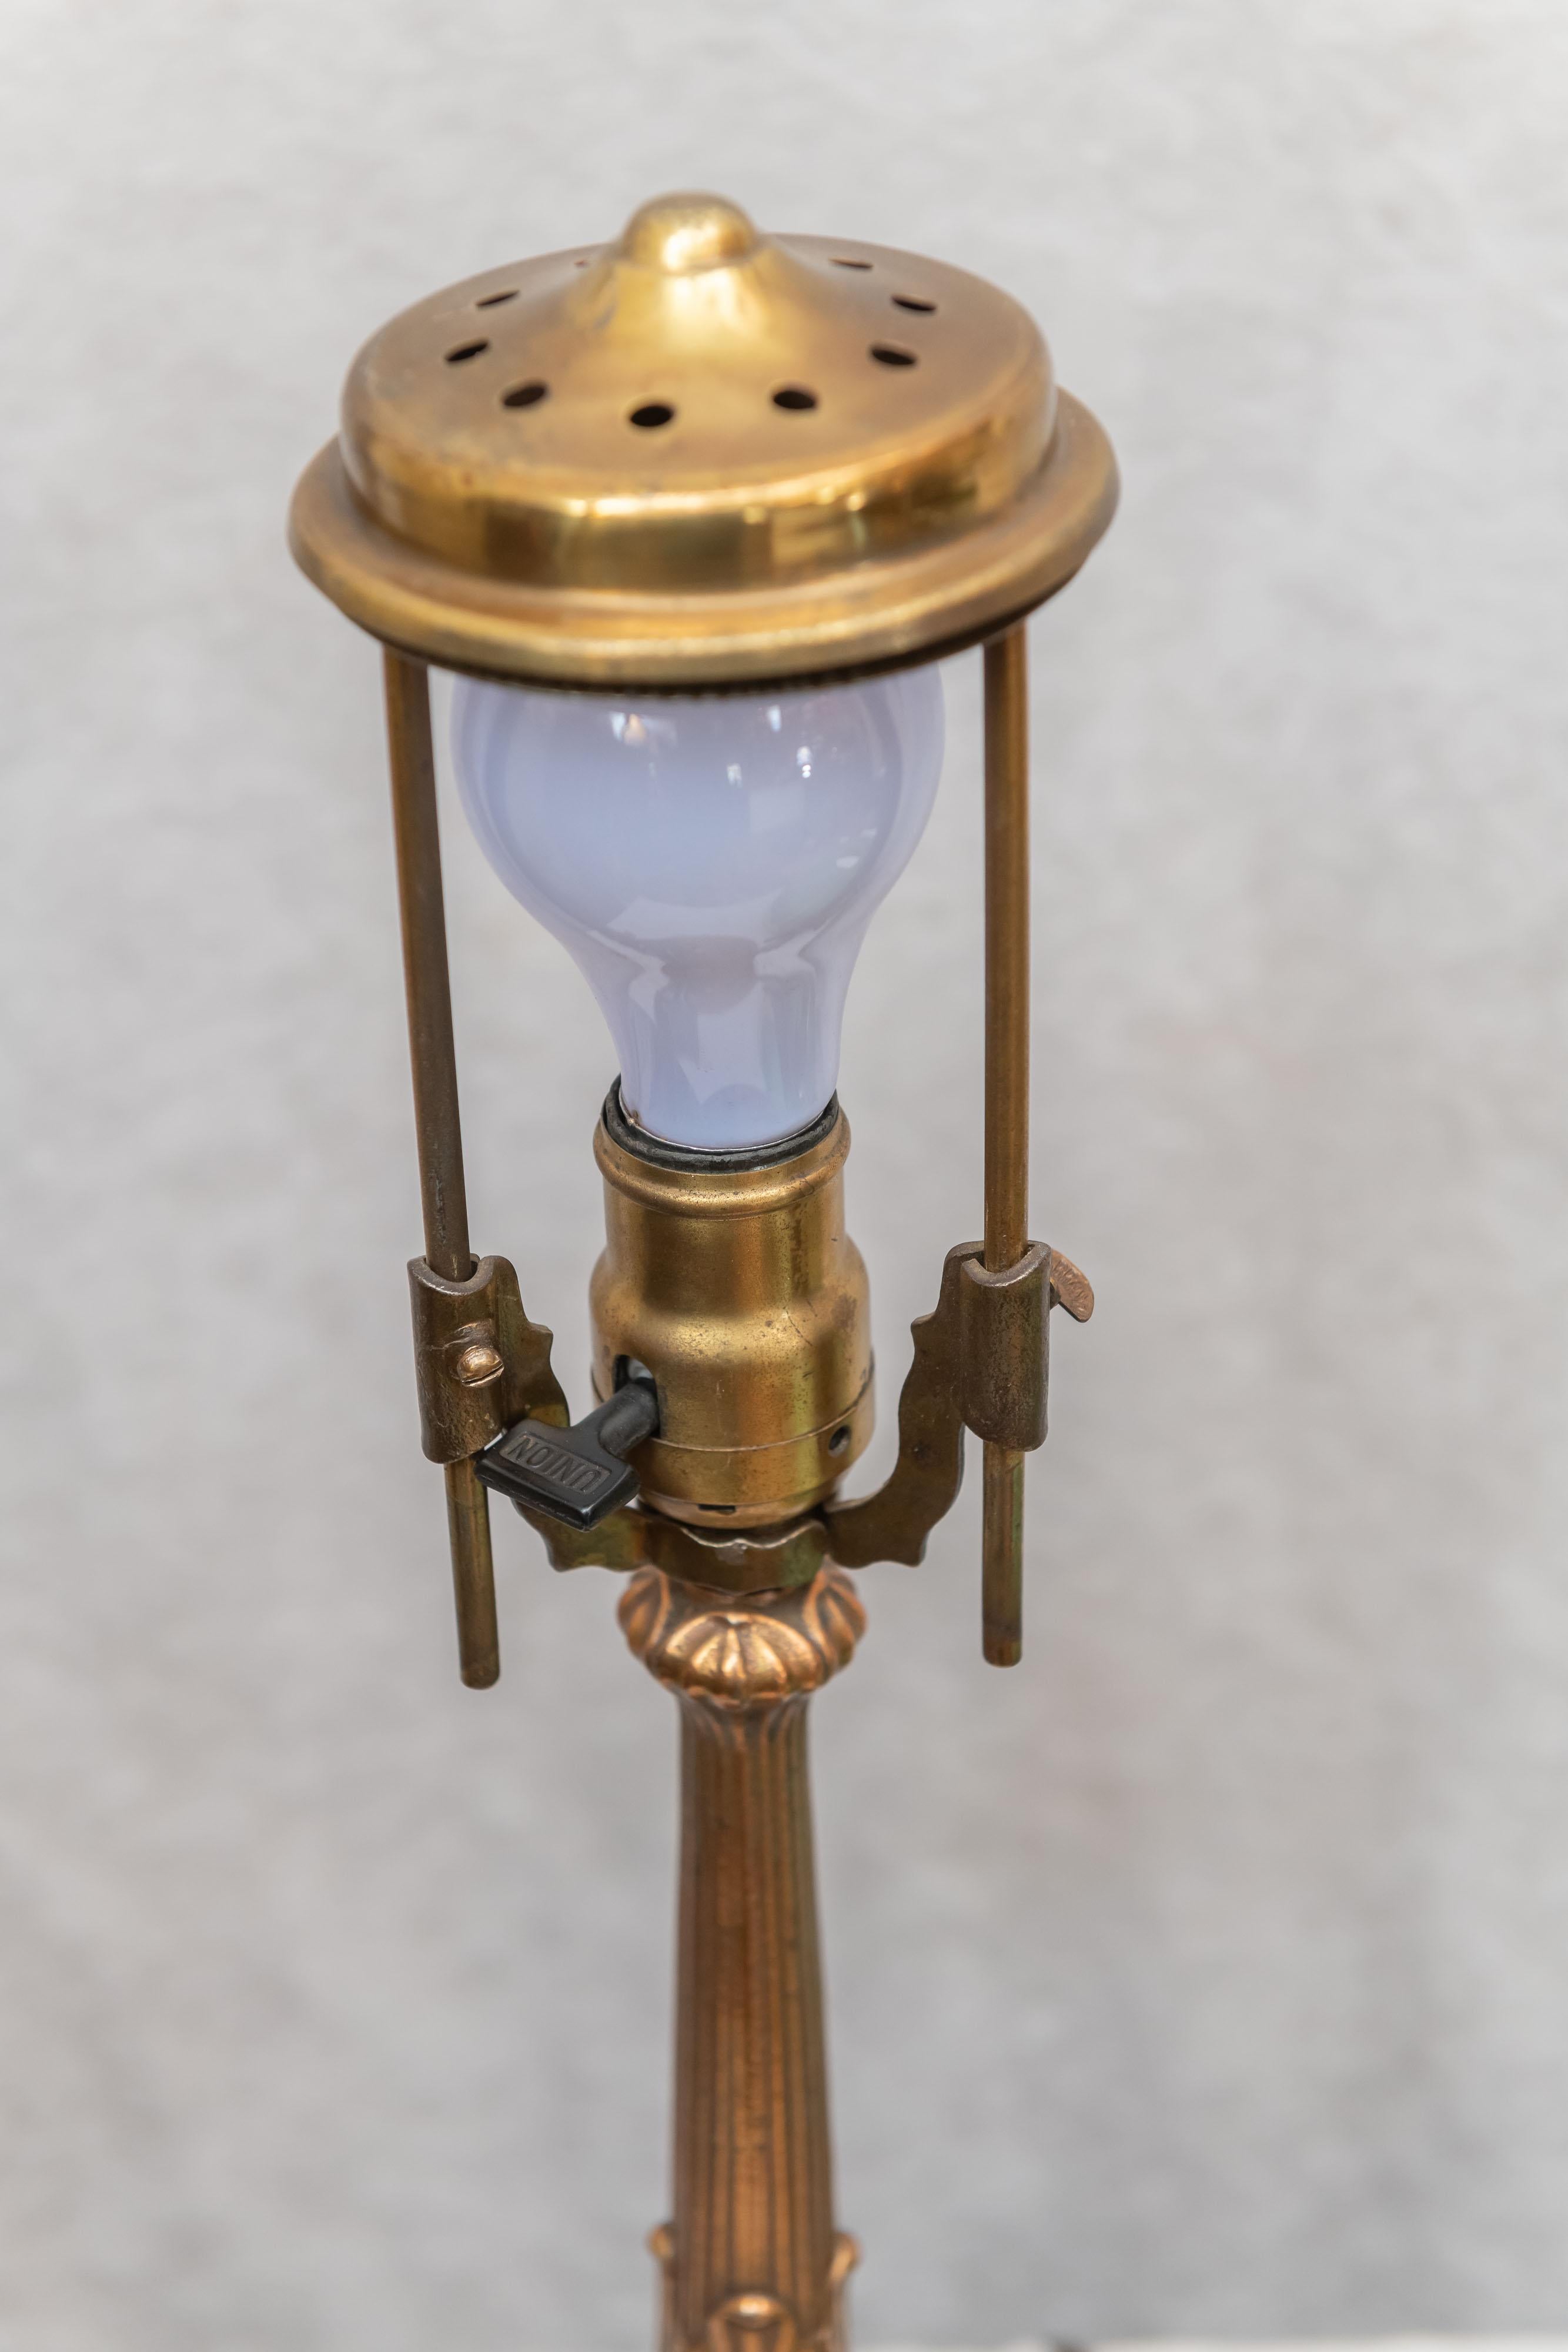 Gilt Reverse/Obverse Painted Lamp, Signed Pittsburgh, circa 1920